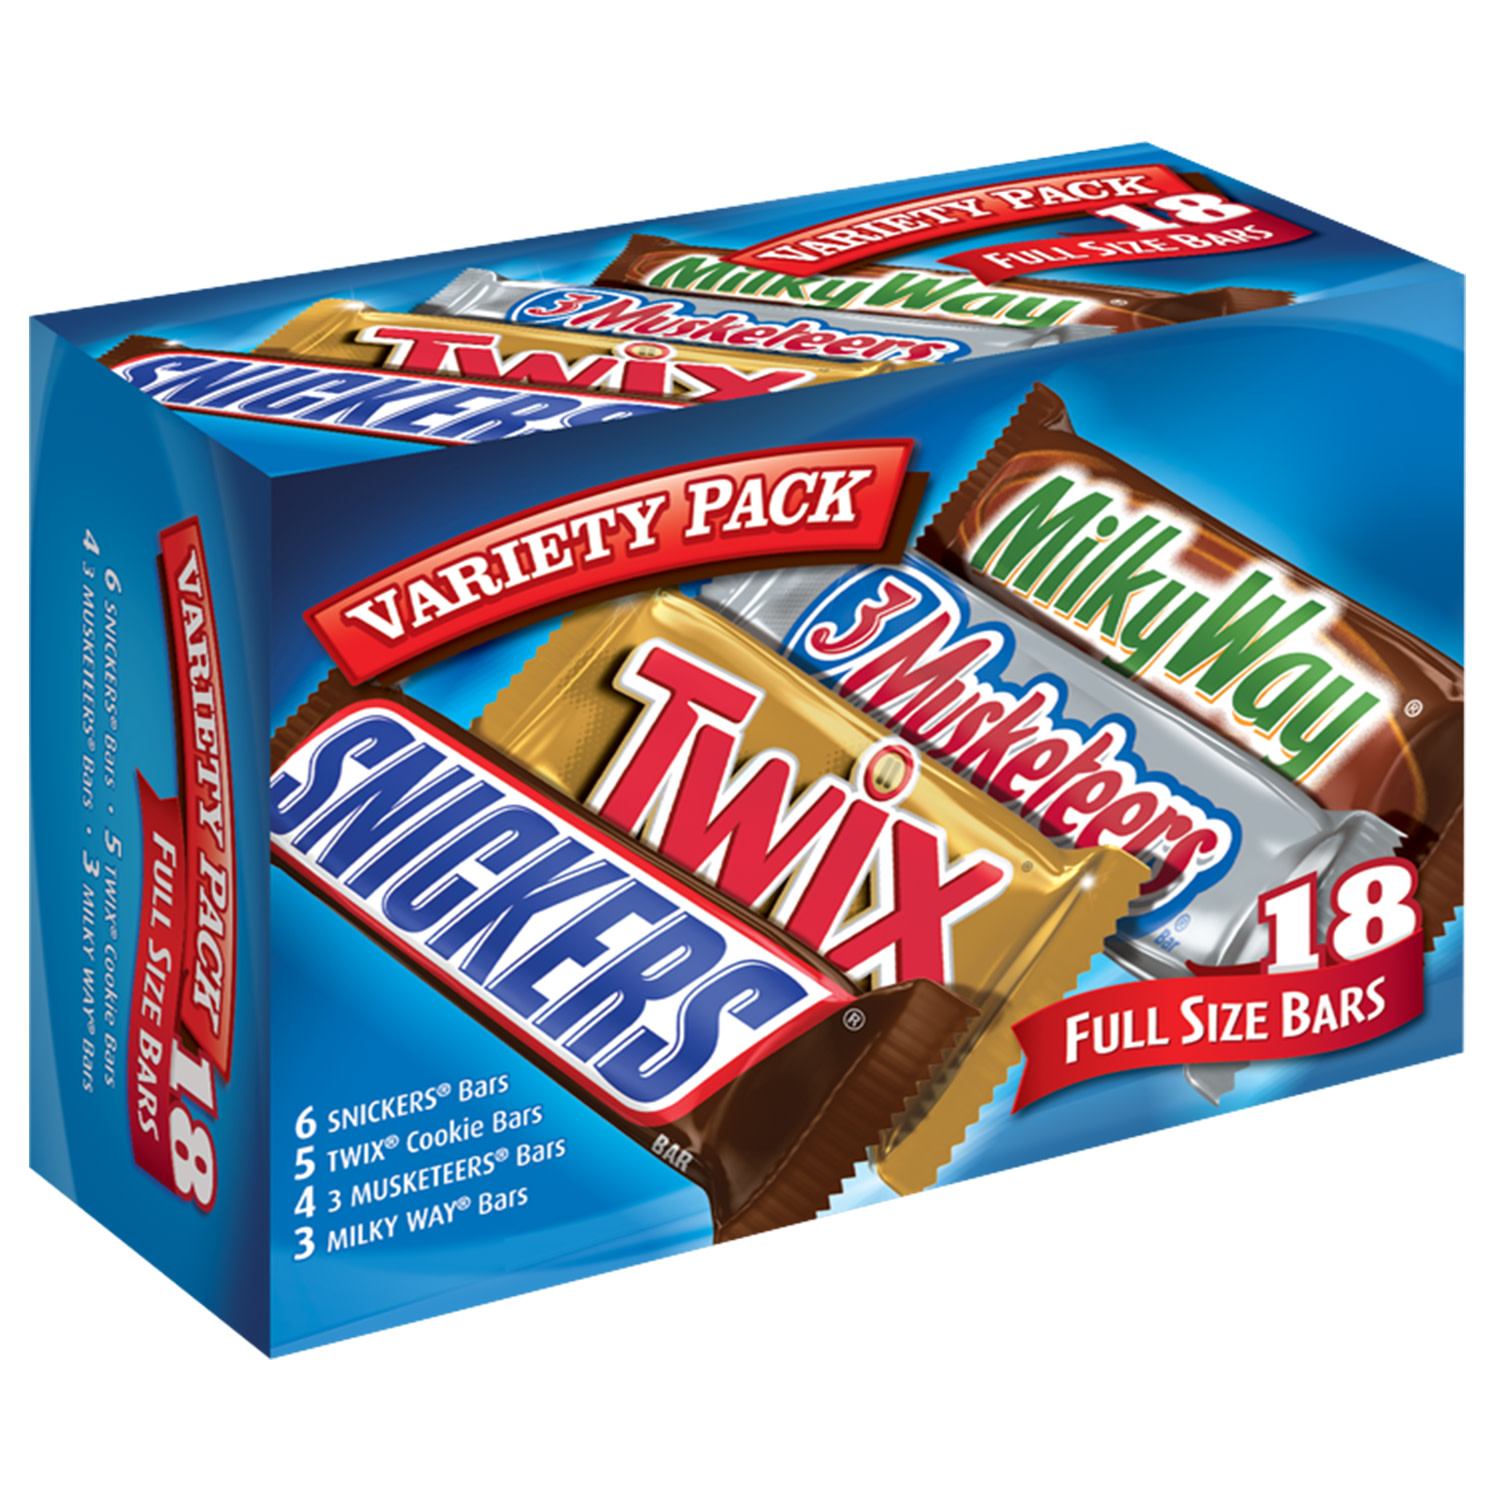 Snickers, Twix, & More Assorted Milk Chocolate Graduation Gifts - 18 Ct Bulk Box - image 1 of 17